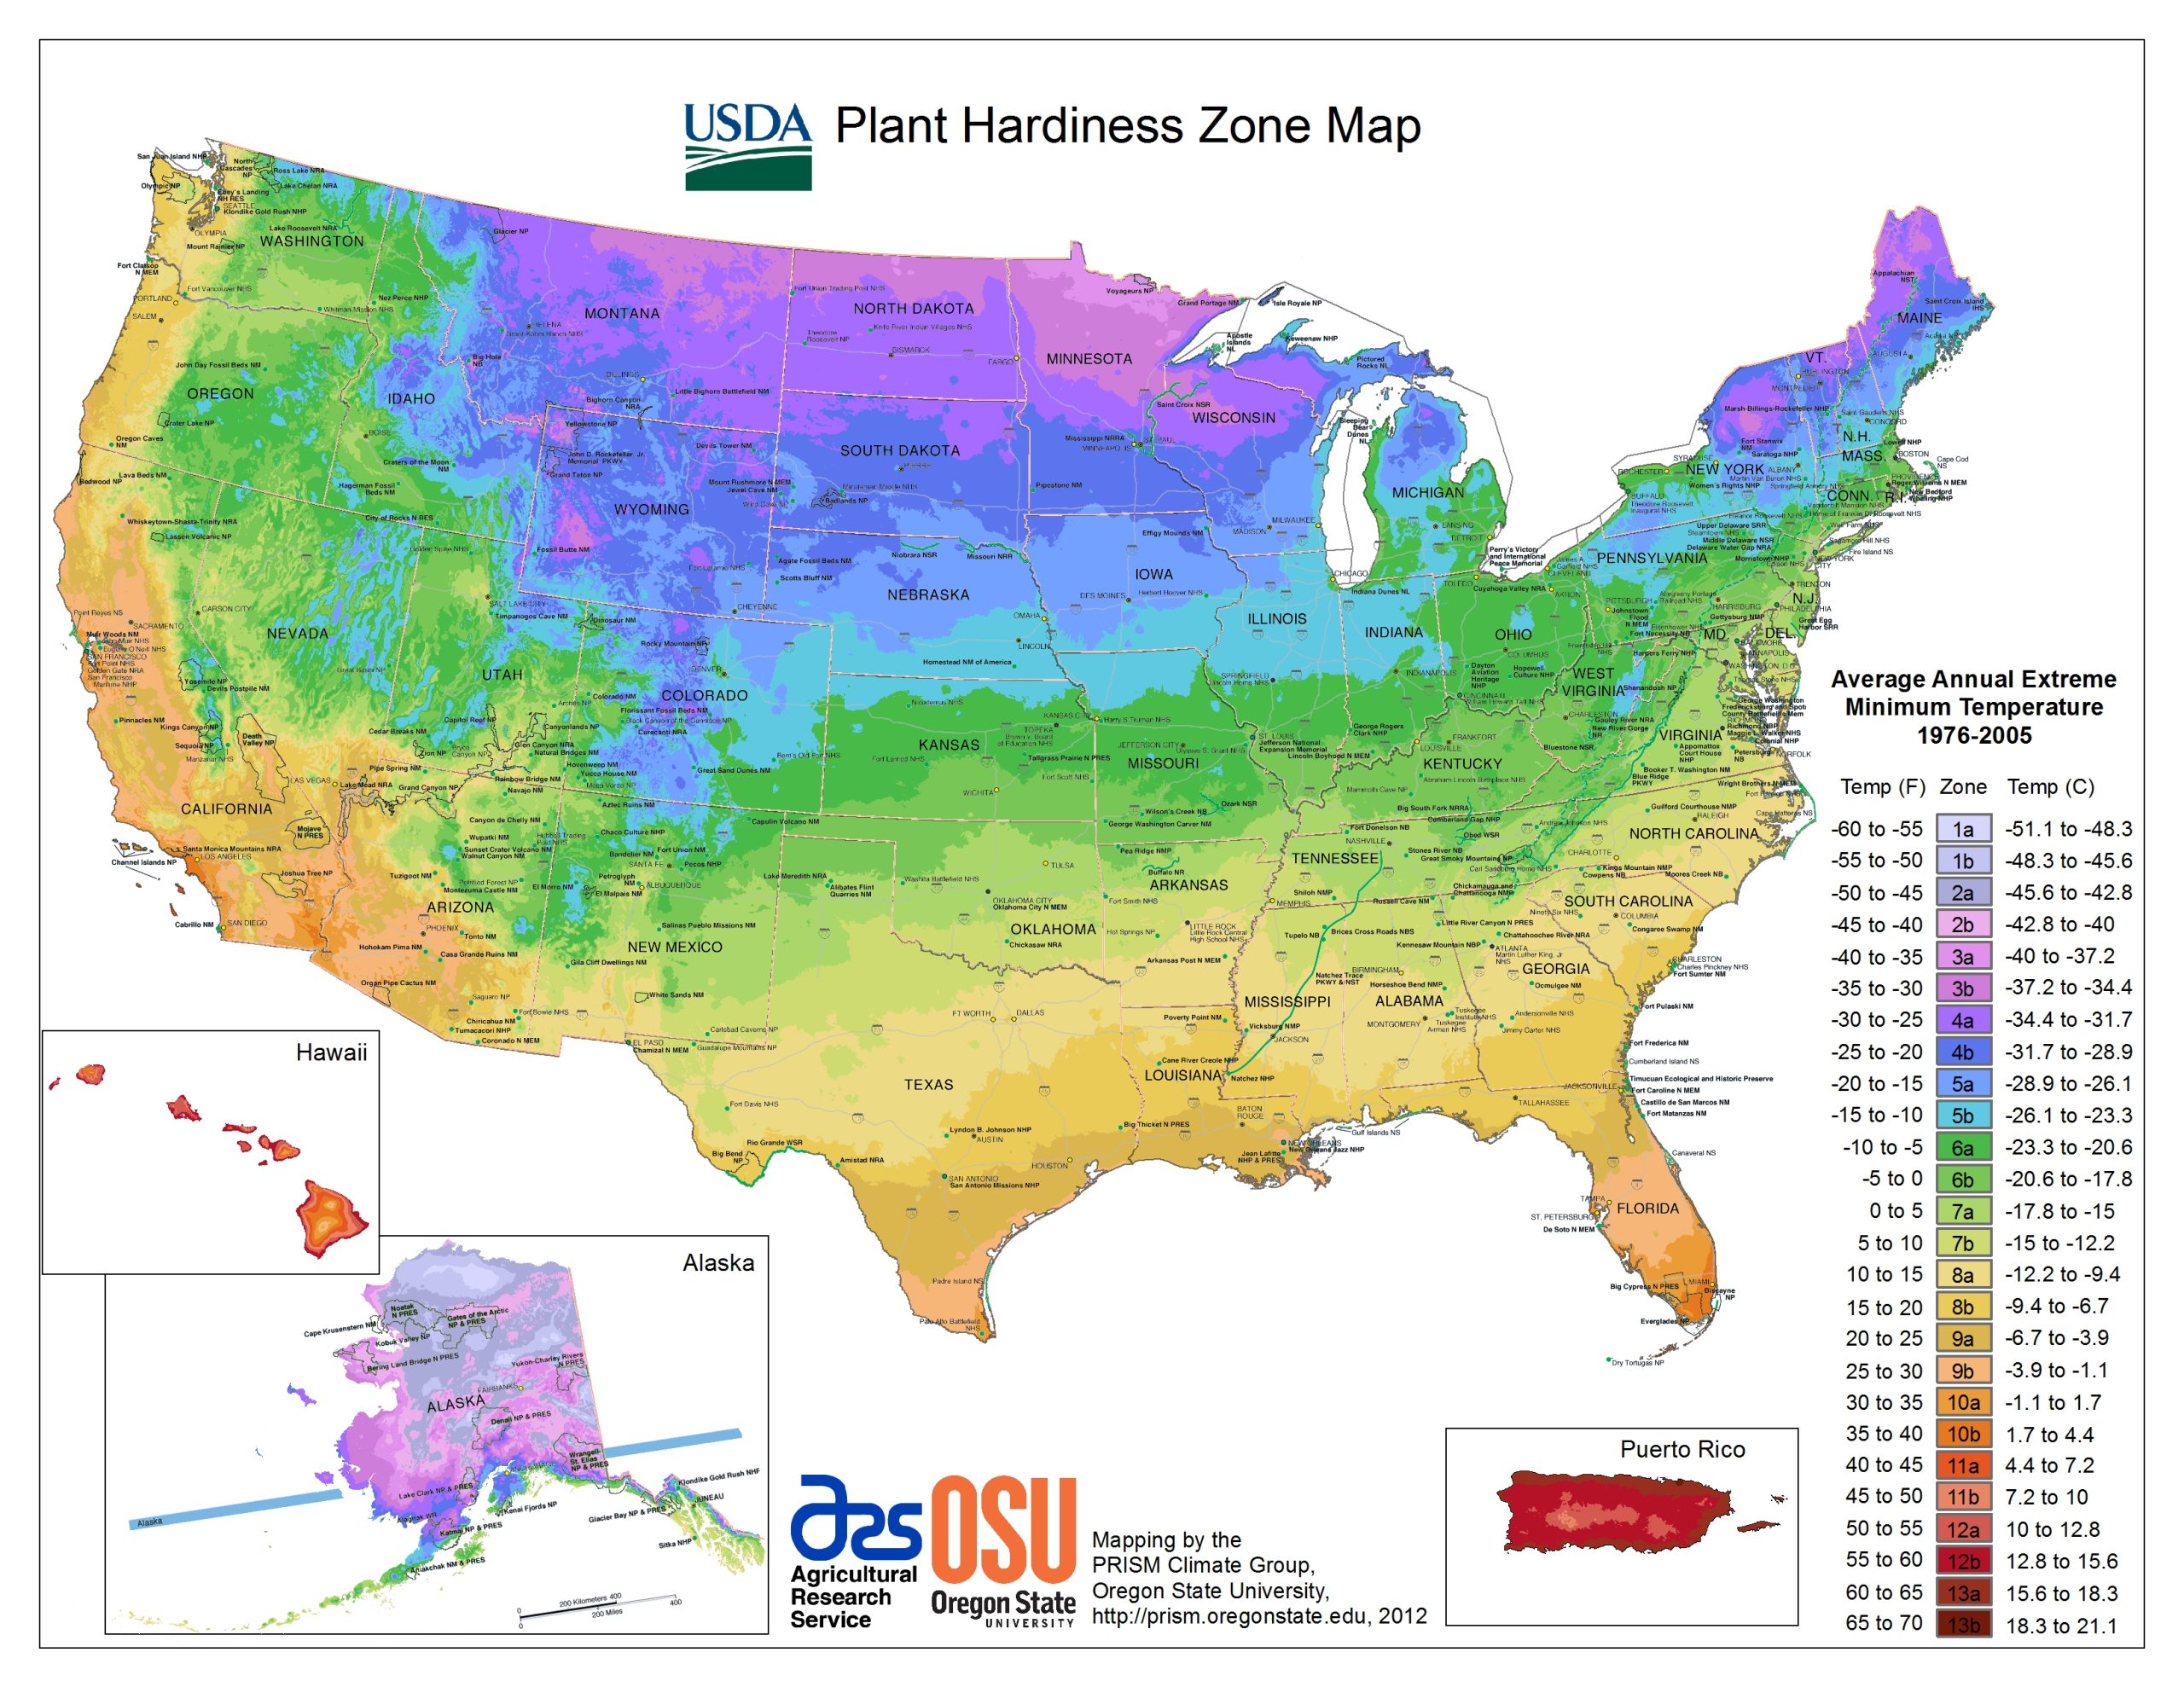 Colored map showing plant growing zones in the USA